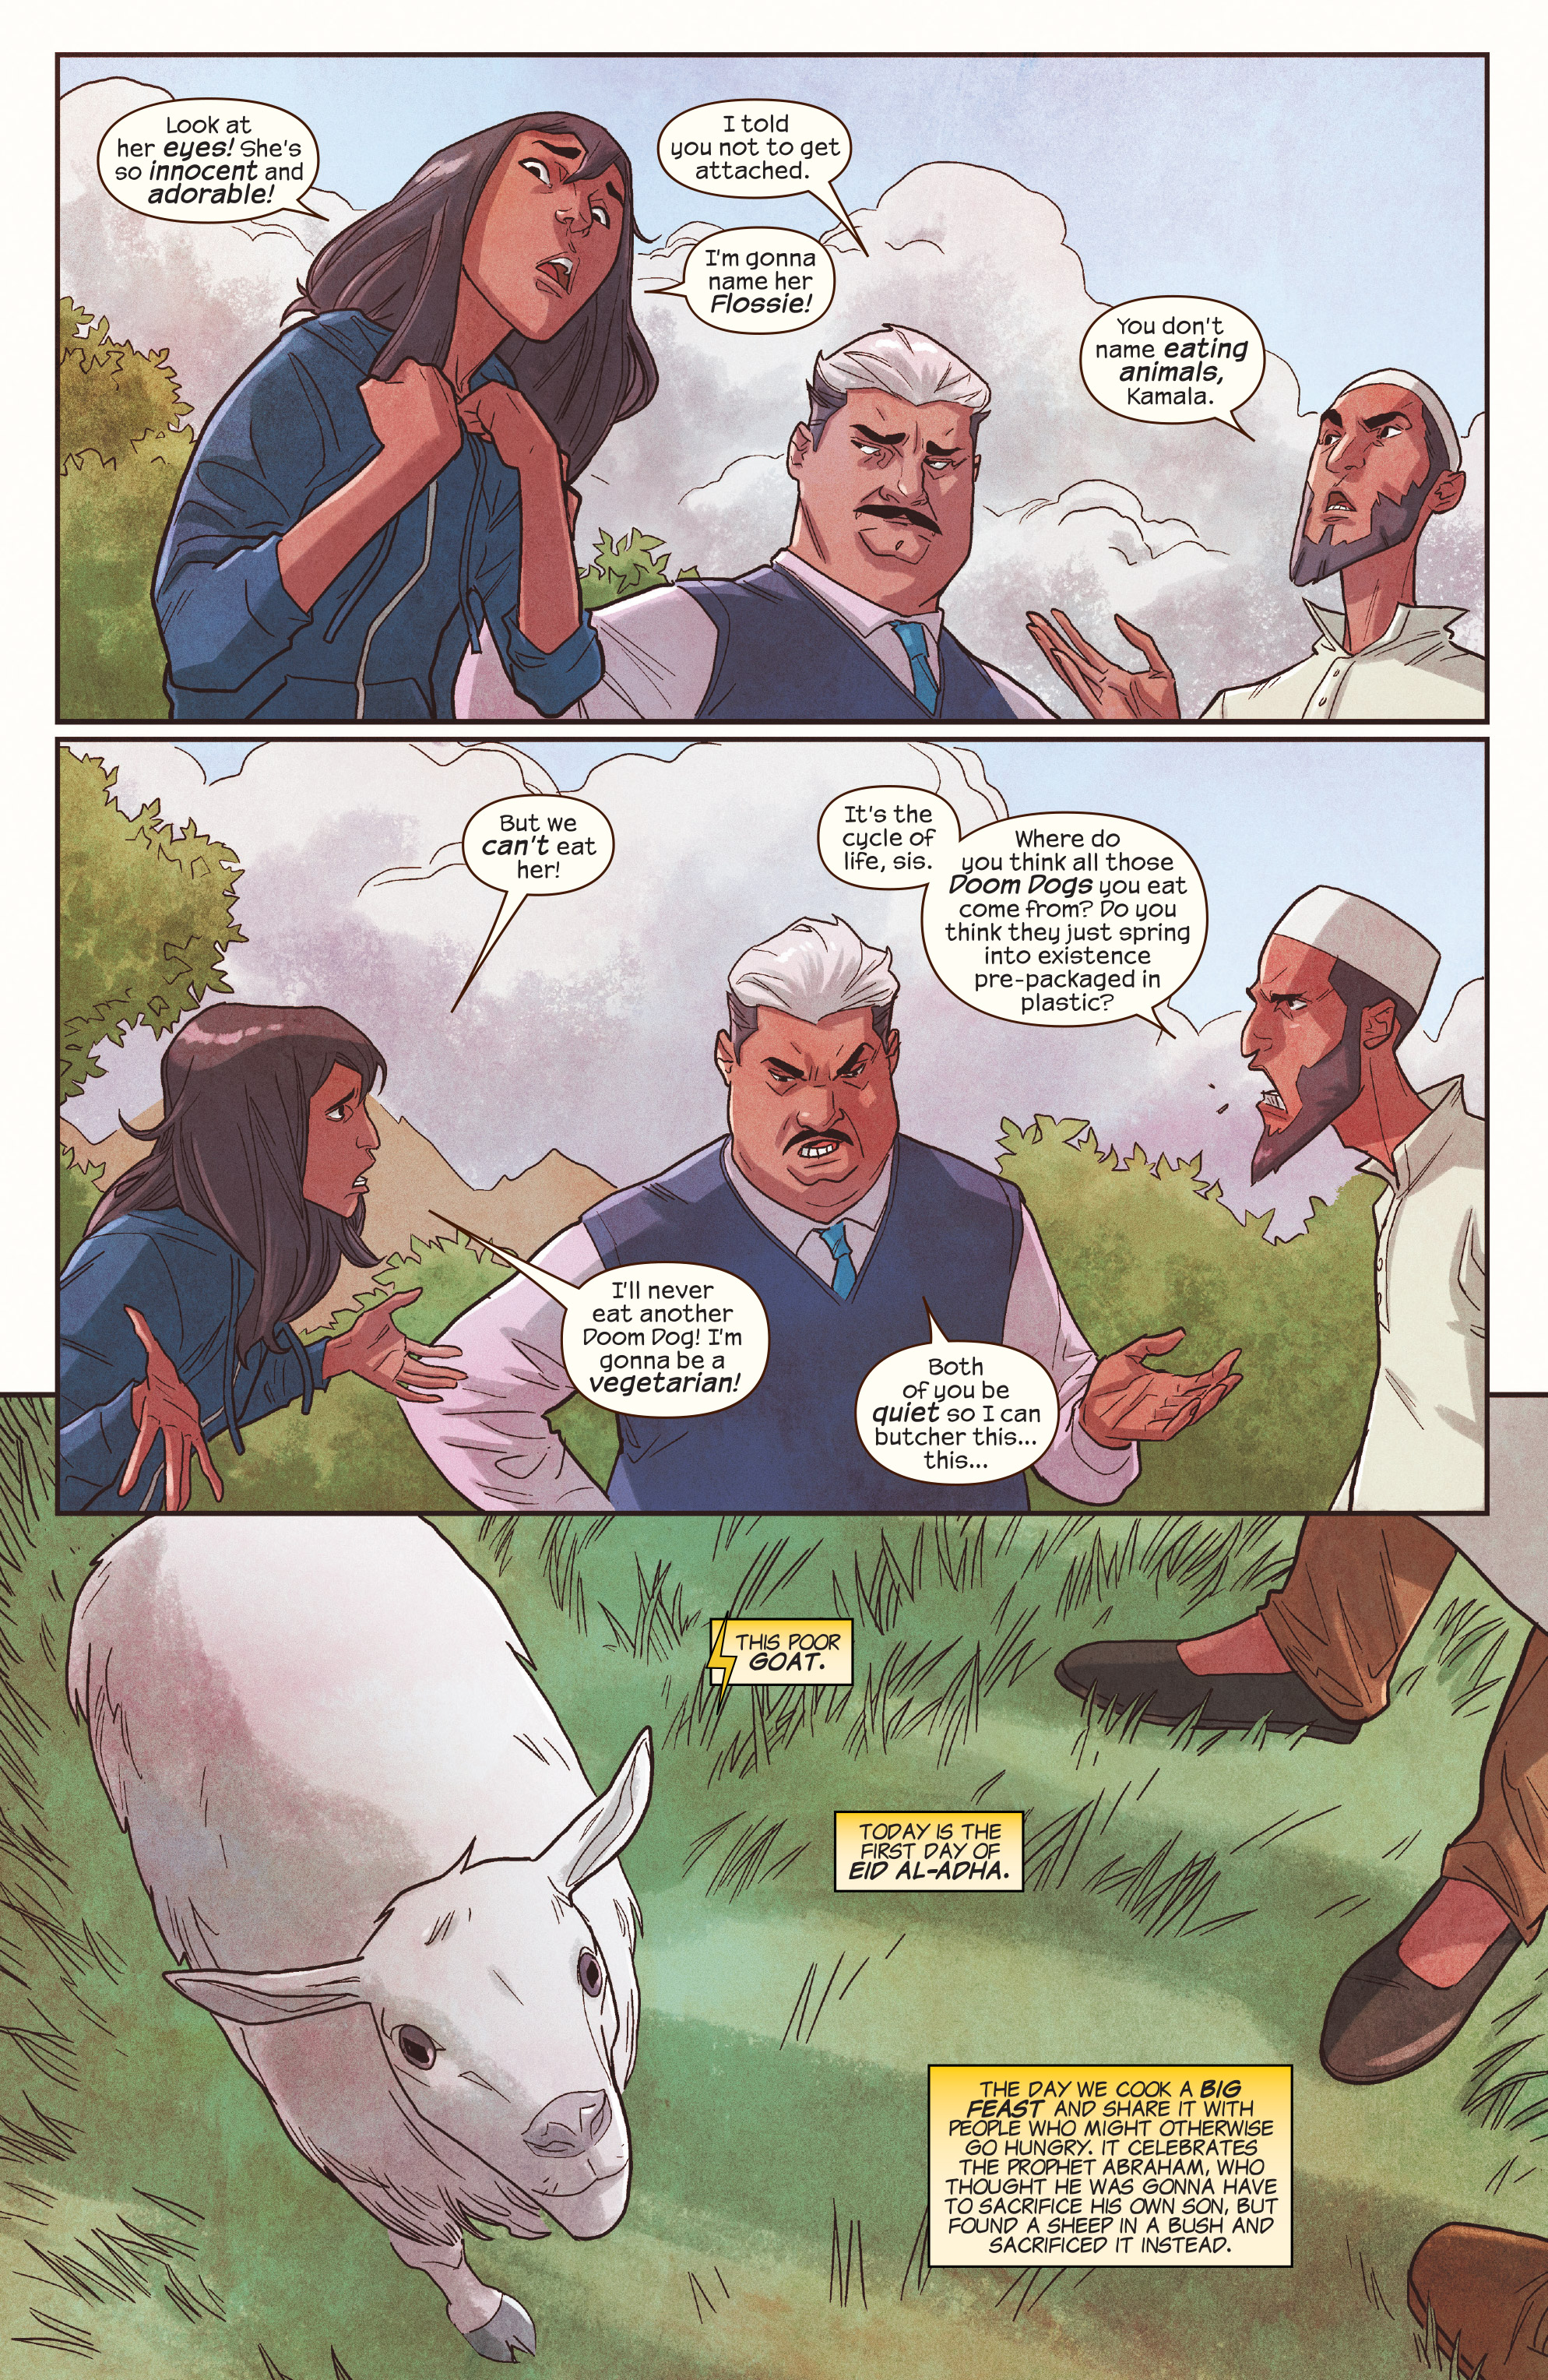 Ms. Marvel (2015-): Chapter 19 - Page 2